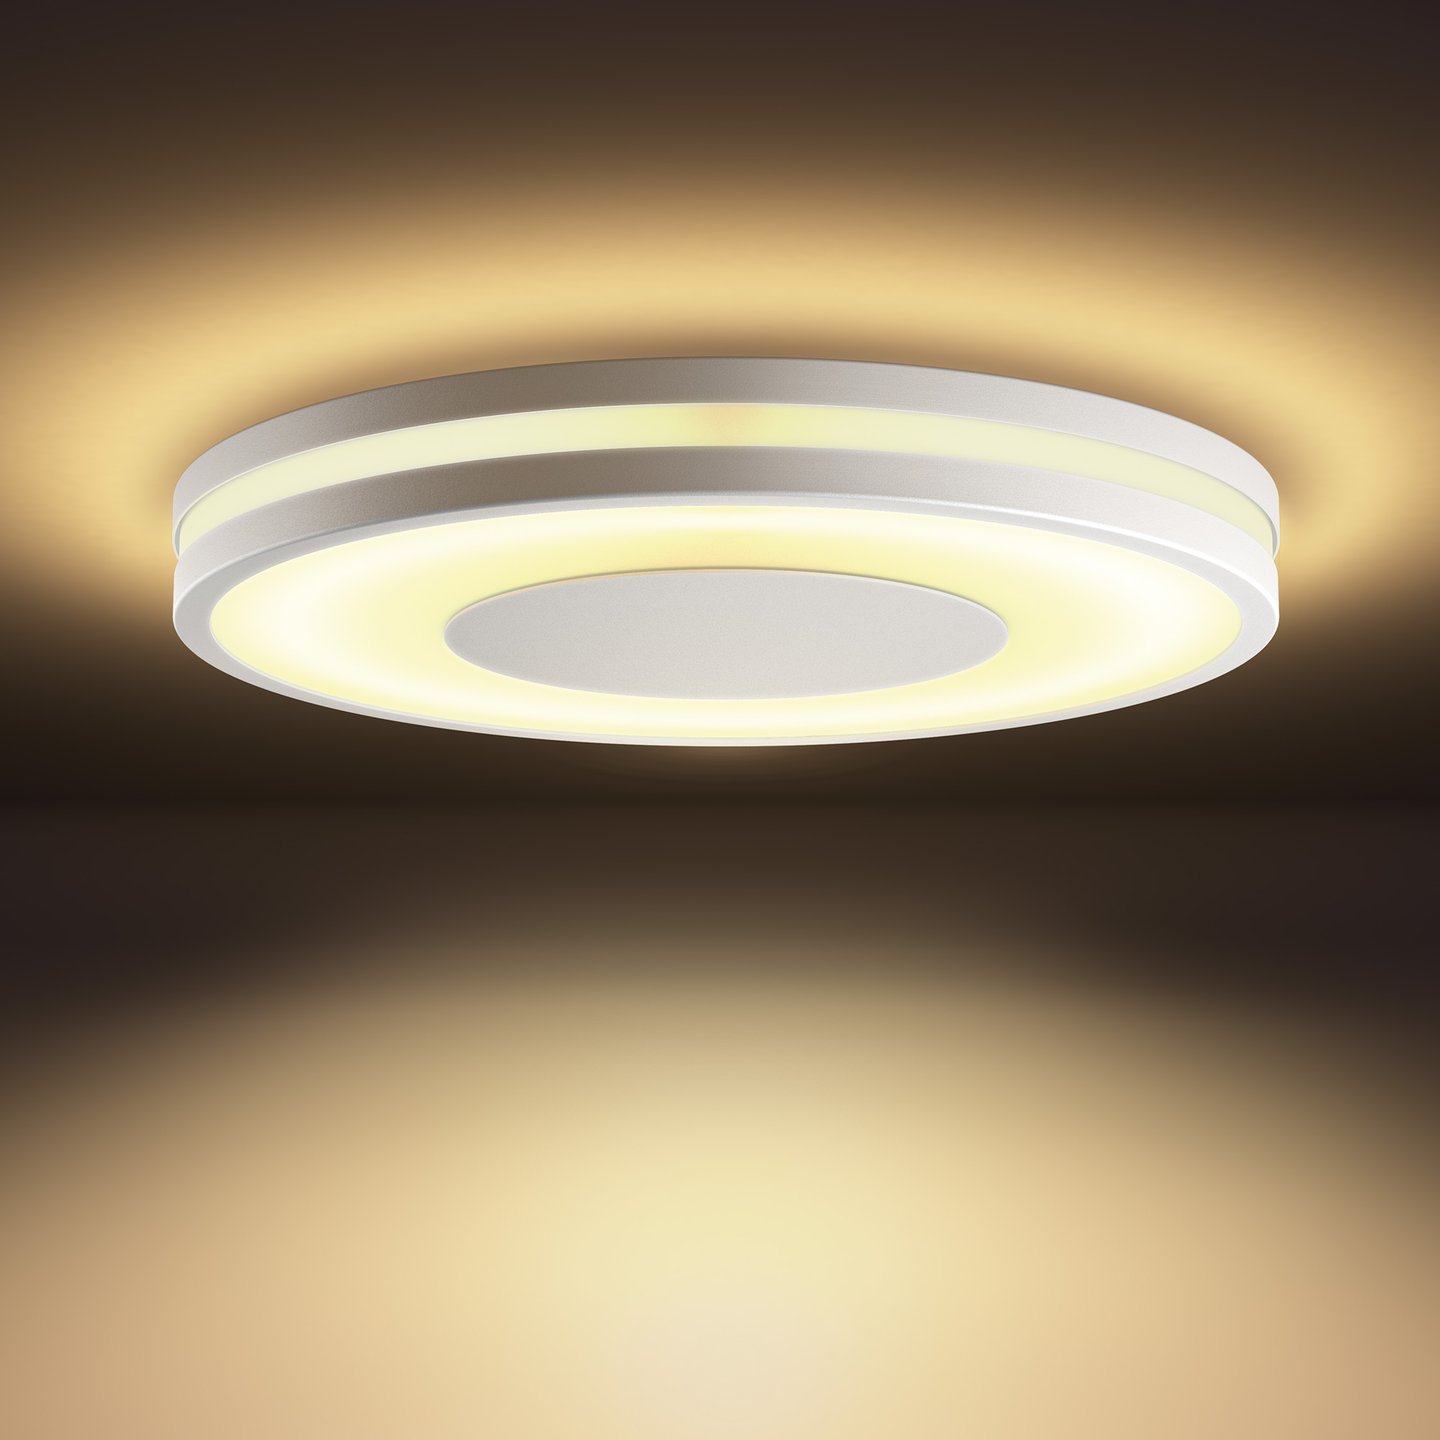 PHILIPS Hue Being LED ceiling light with - 8719514341159 | REUTER